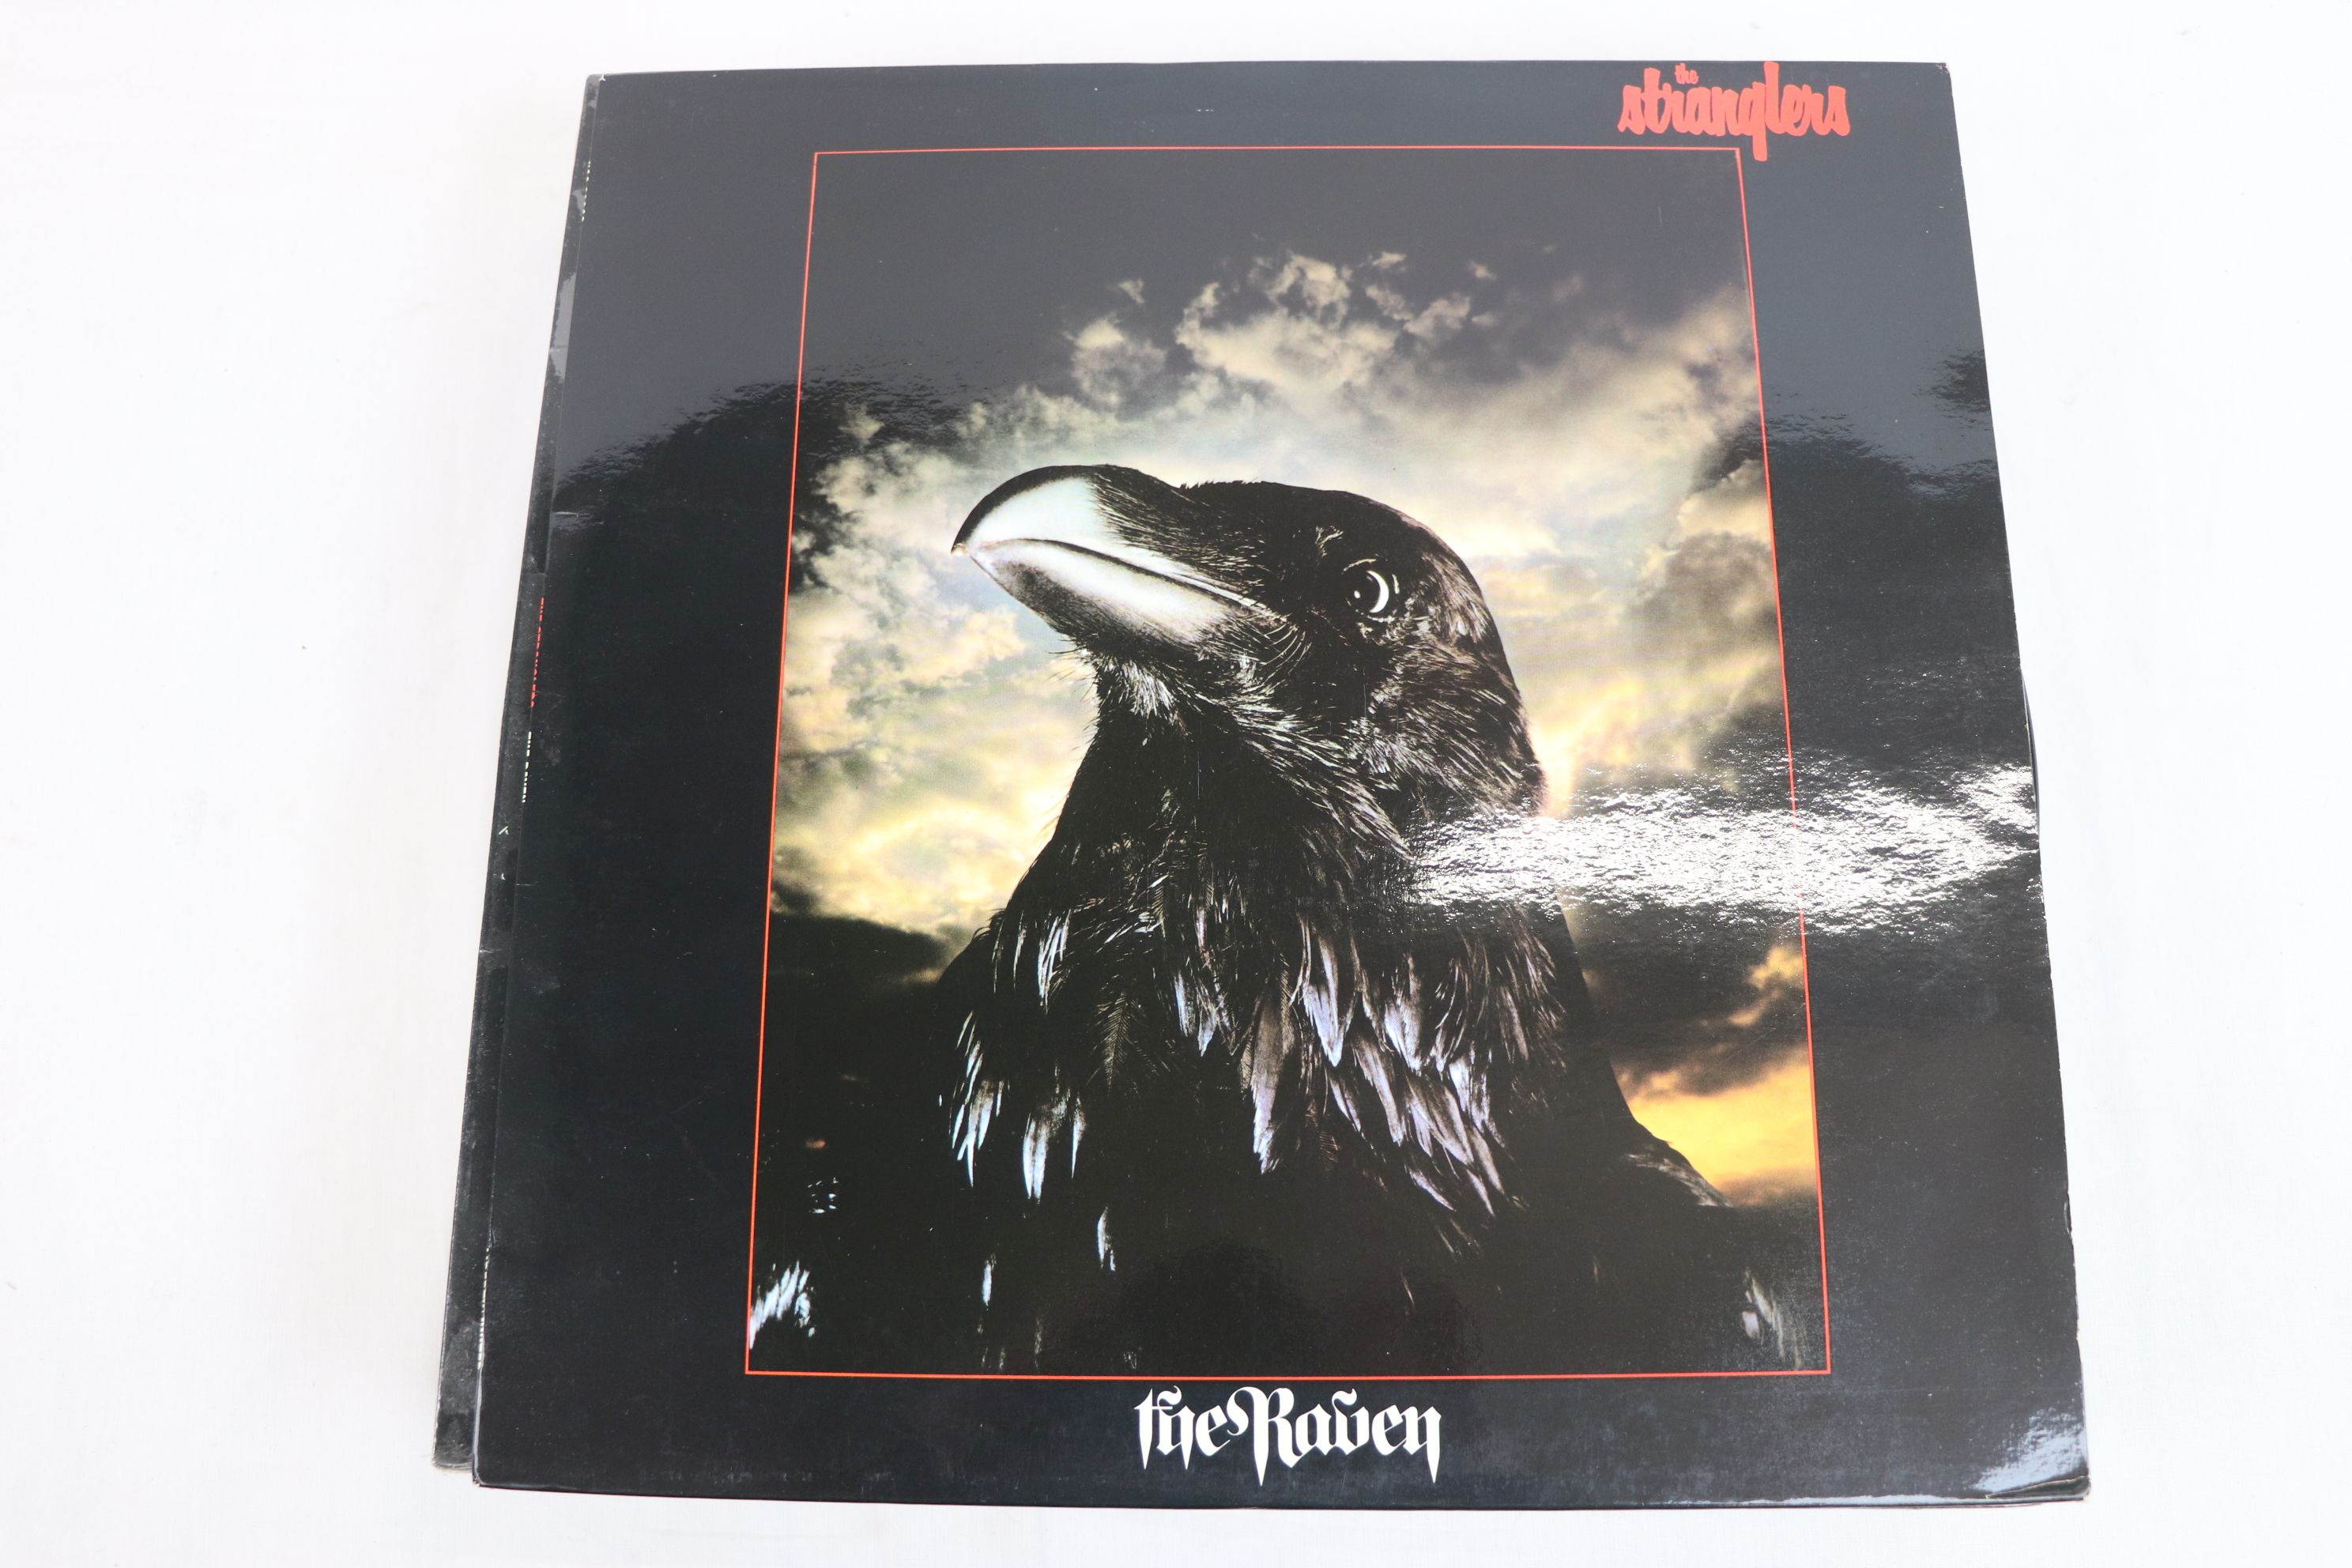 Vinyl - The Stranglers - Collection of 24 x 12" Singles, 3 x picture discs and 3 x LPs (The Raven, - Image 5 of 12